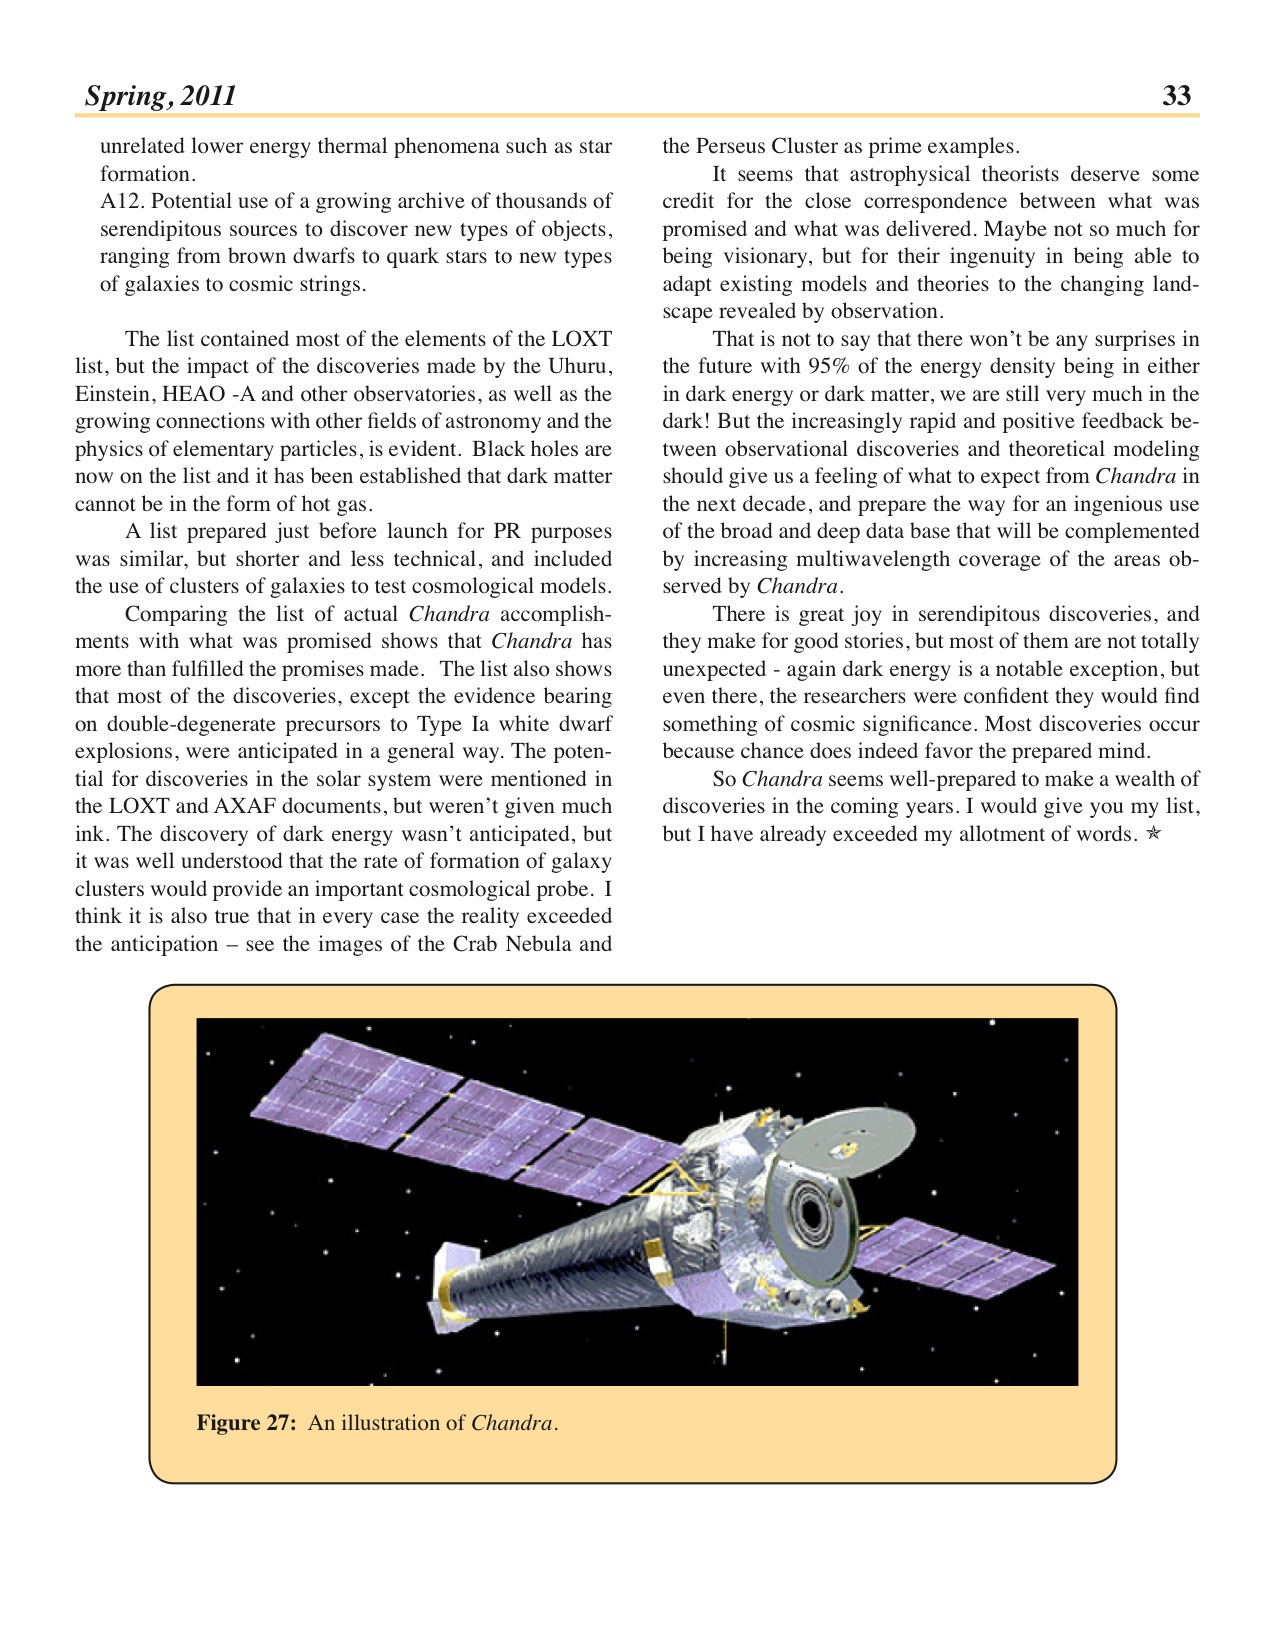 Page 33 of the Chandra Newsletter, issue 18.